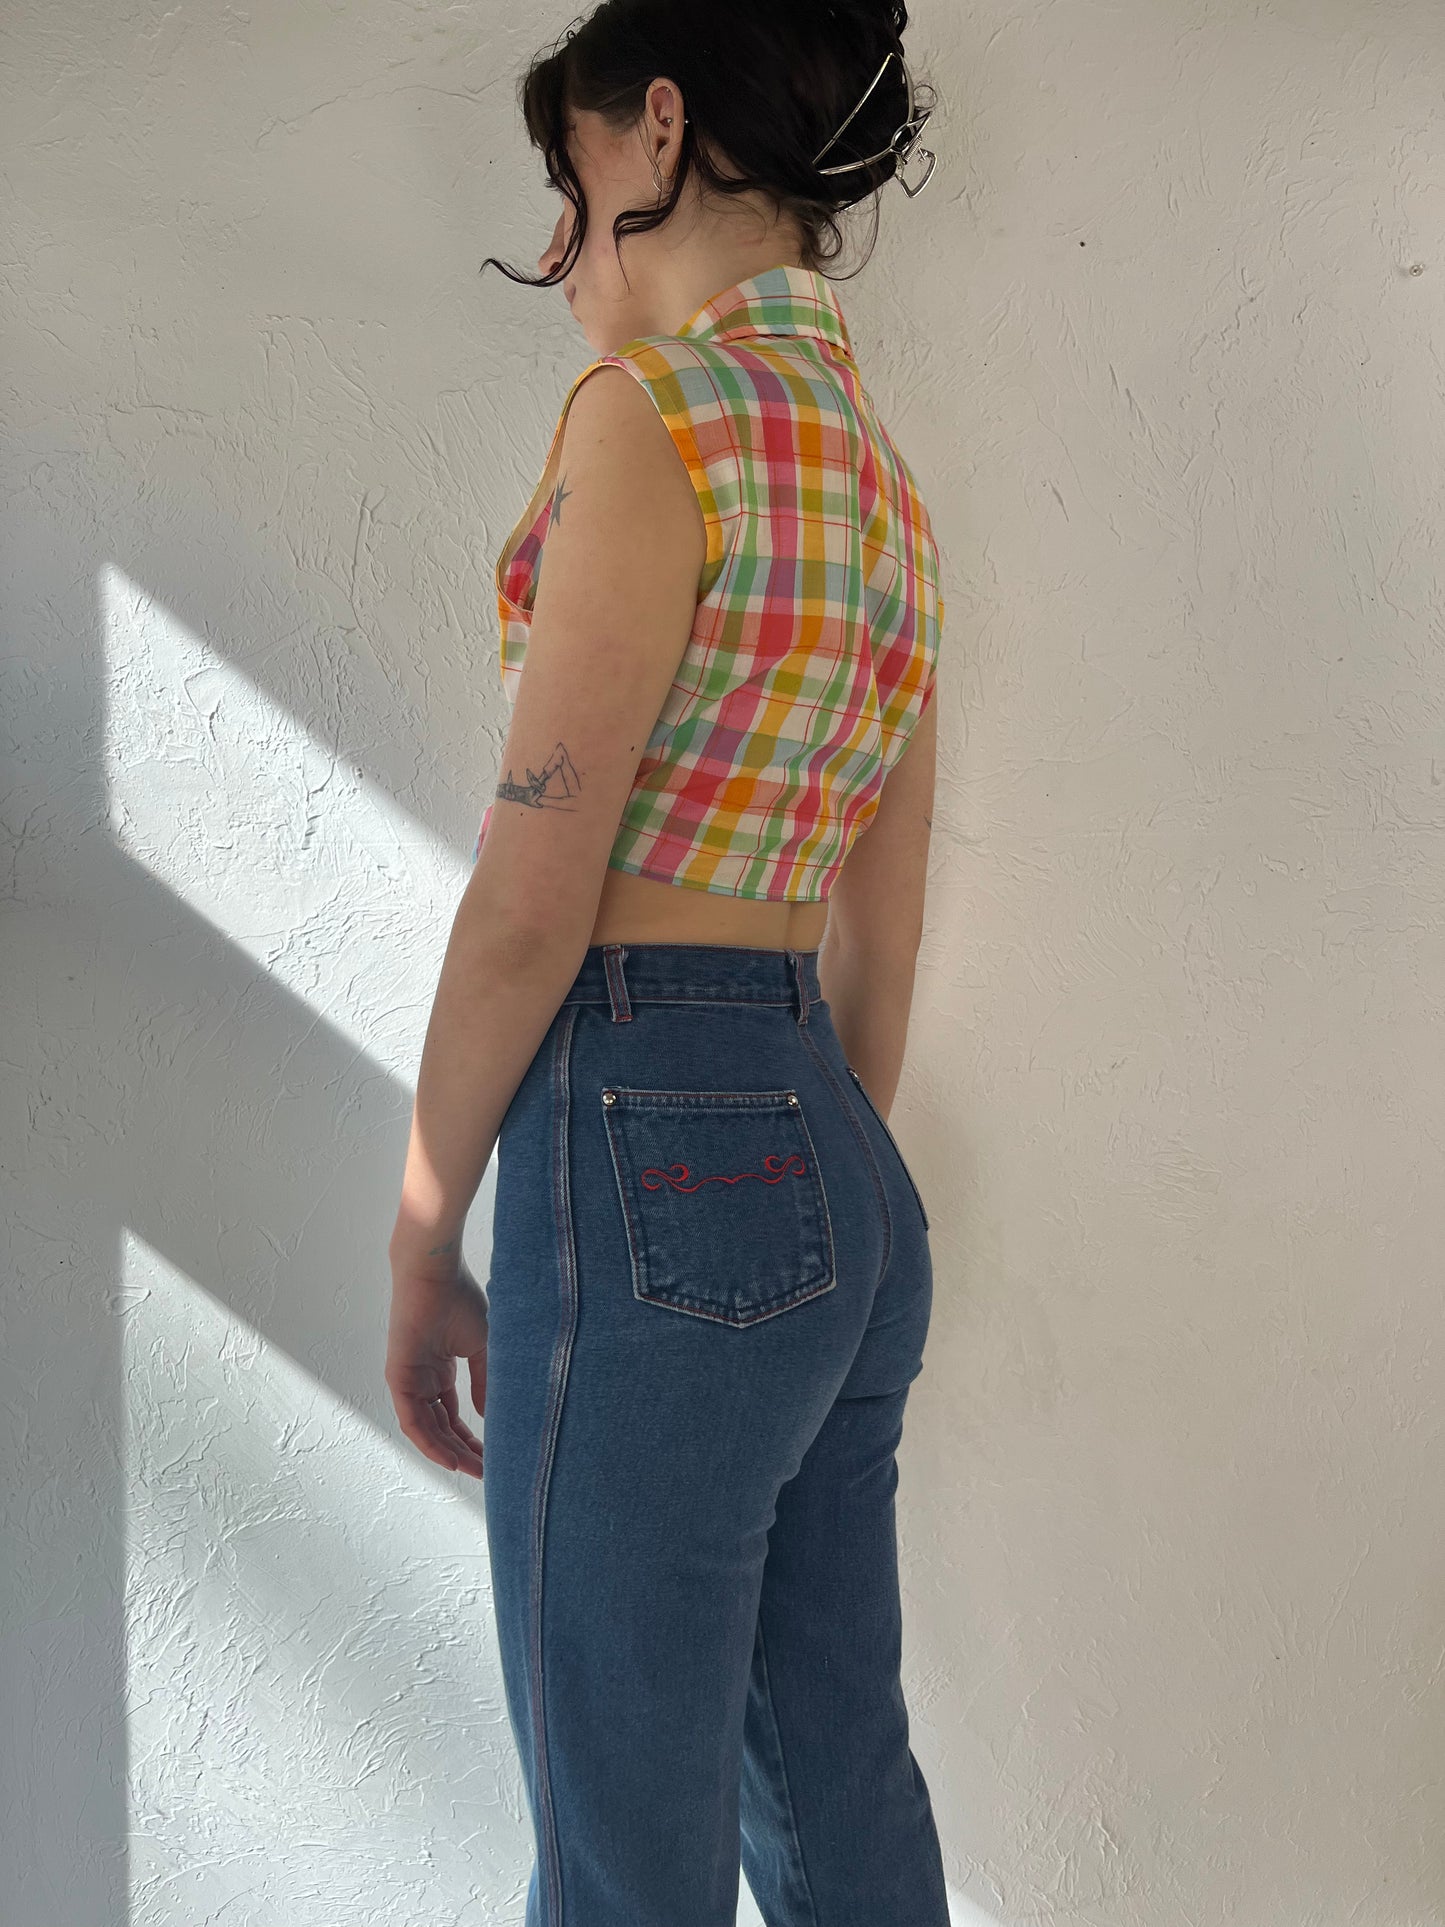 70s 'Fritzy' Plaid Tie Up Crop Top / Small